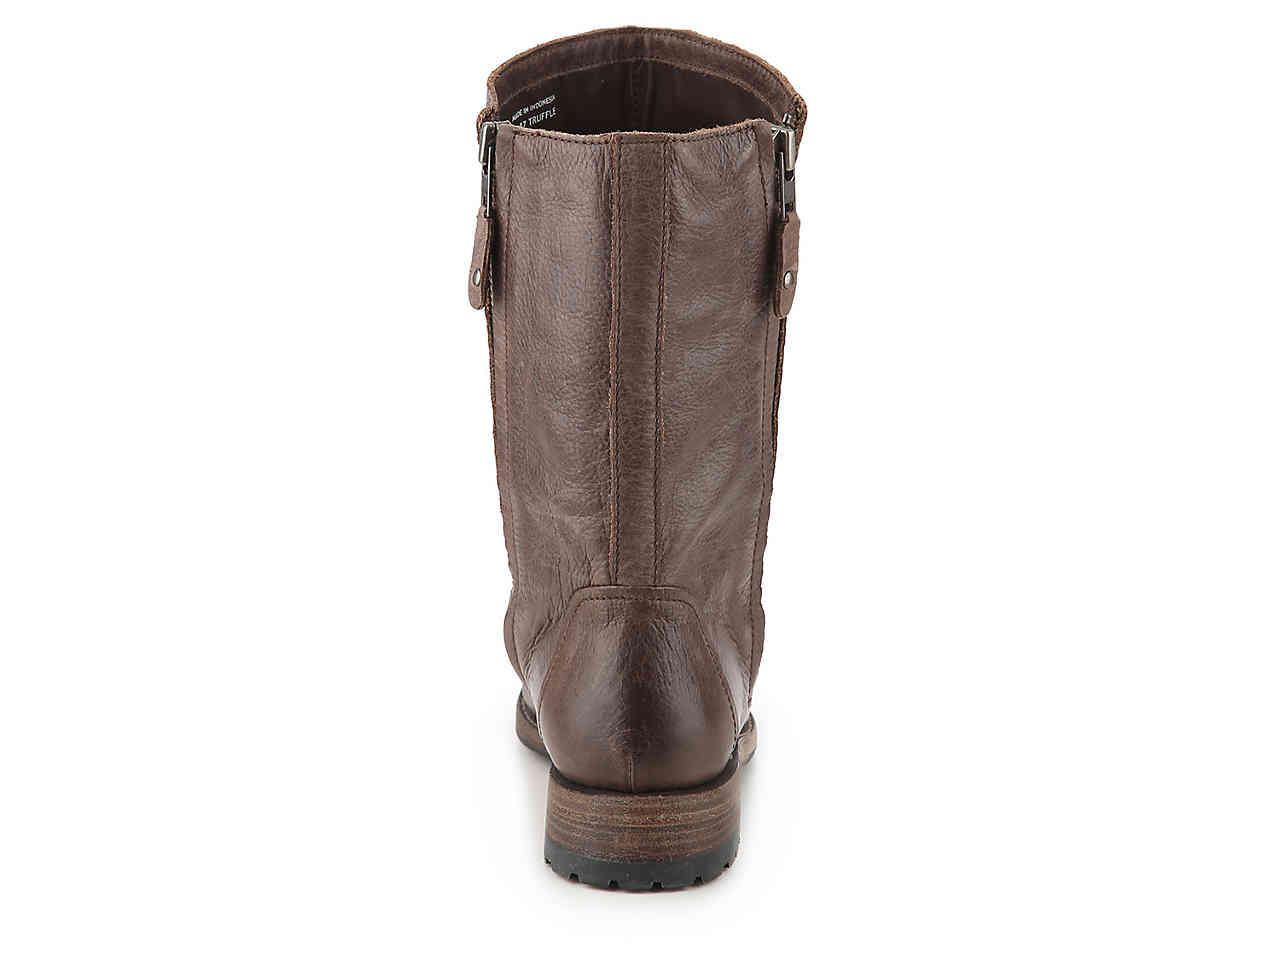 Blackstone Leather Kl87 Boot in Brown 